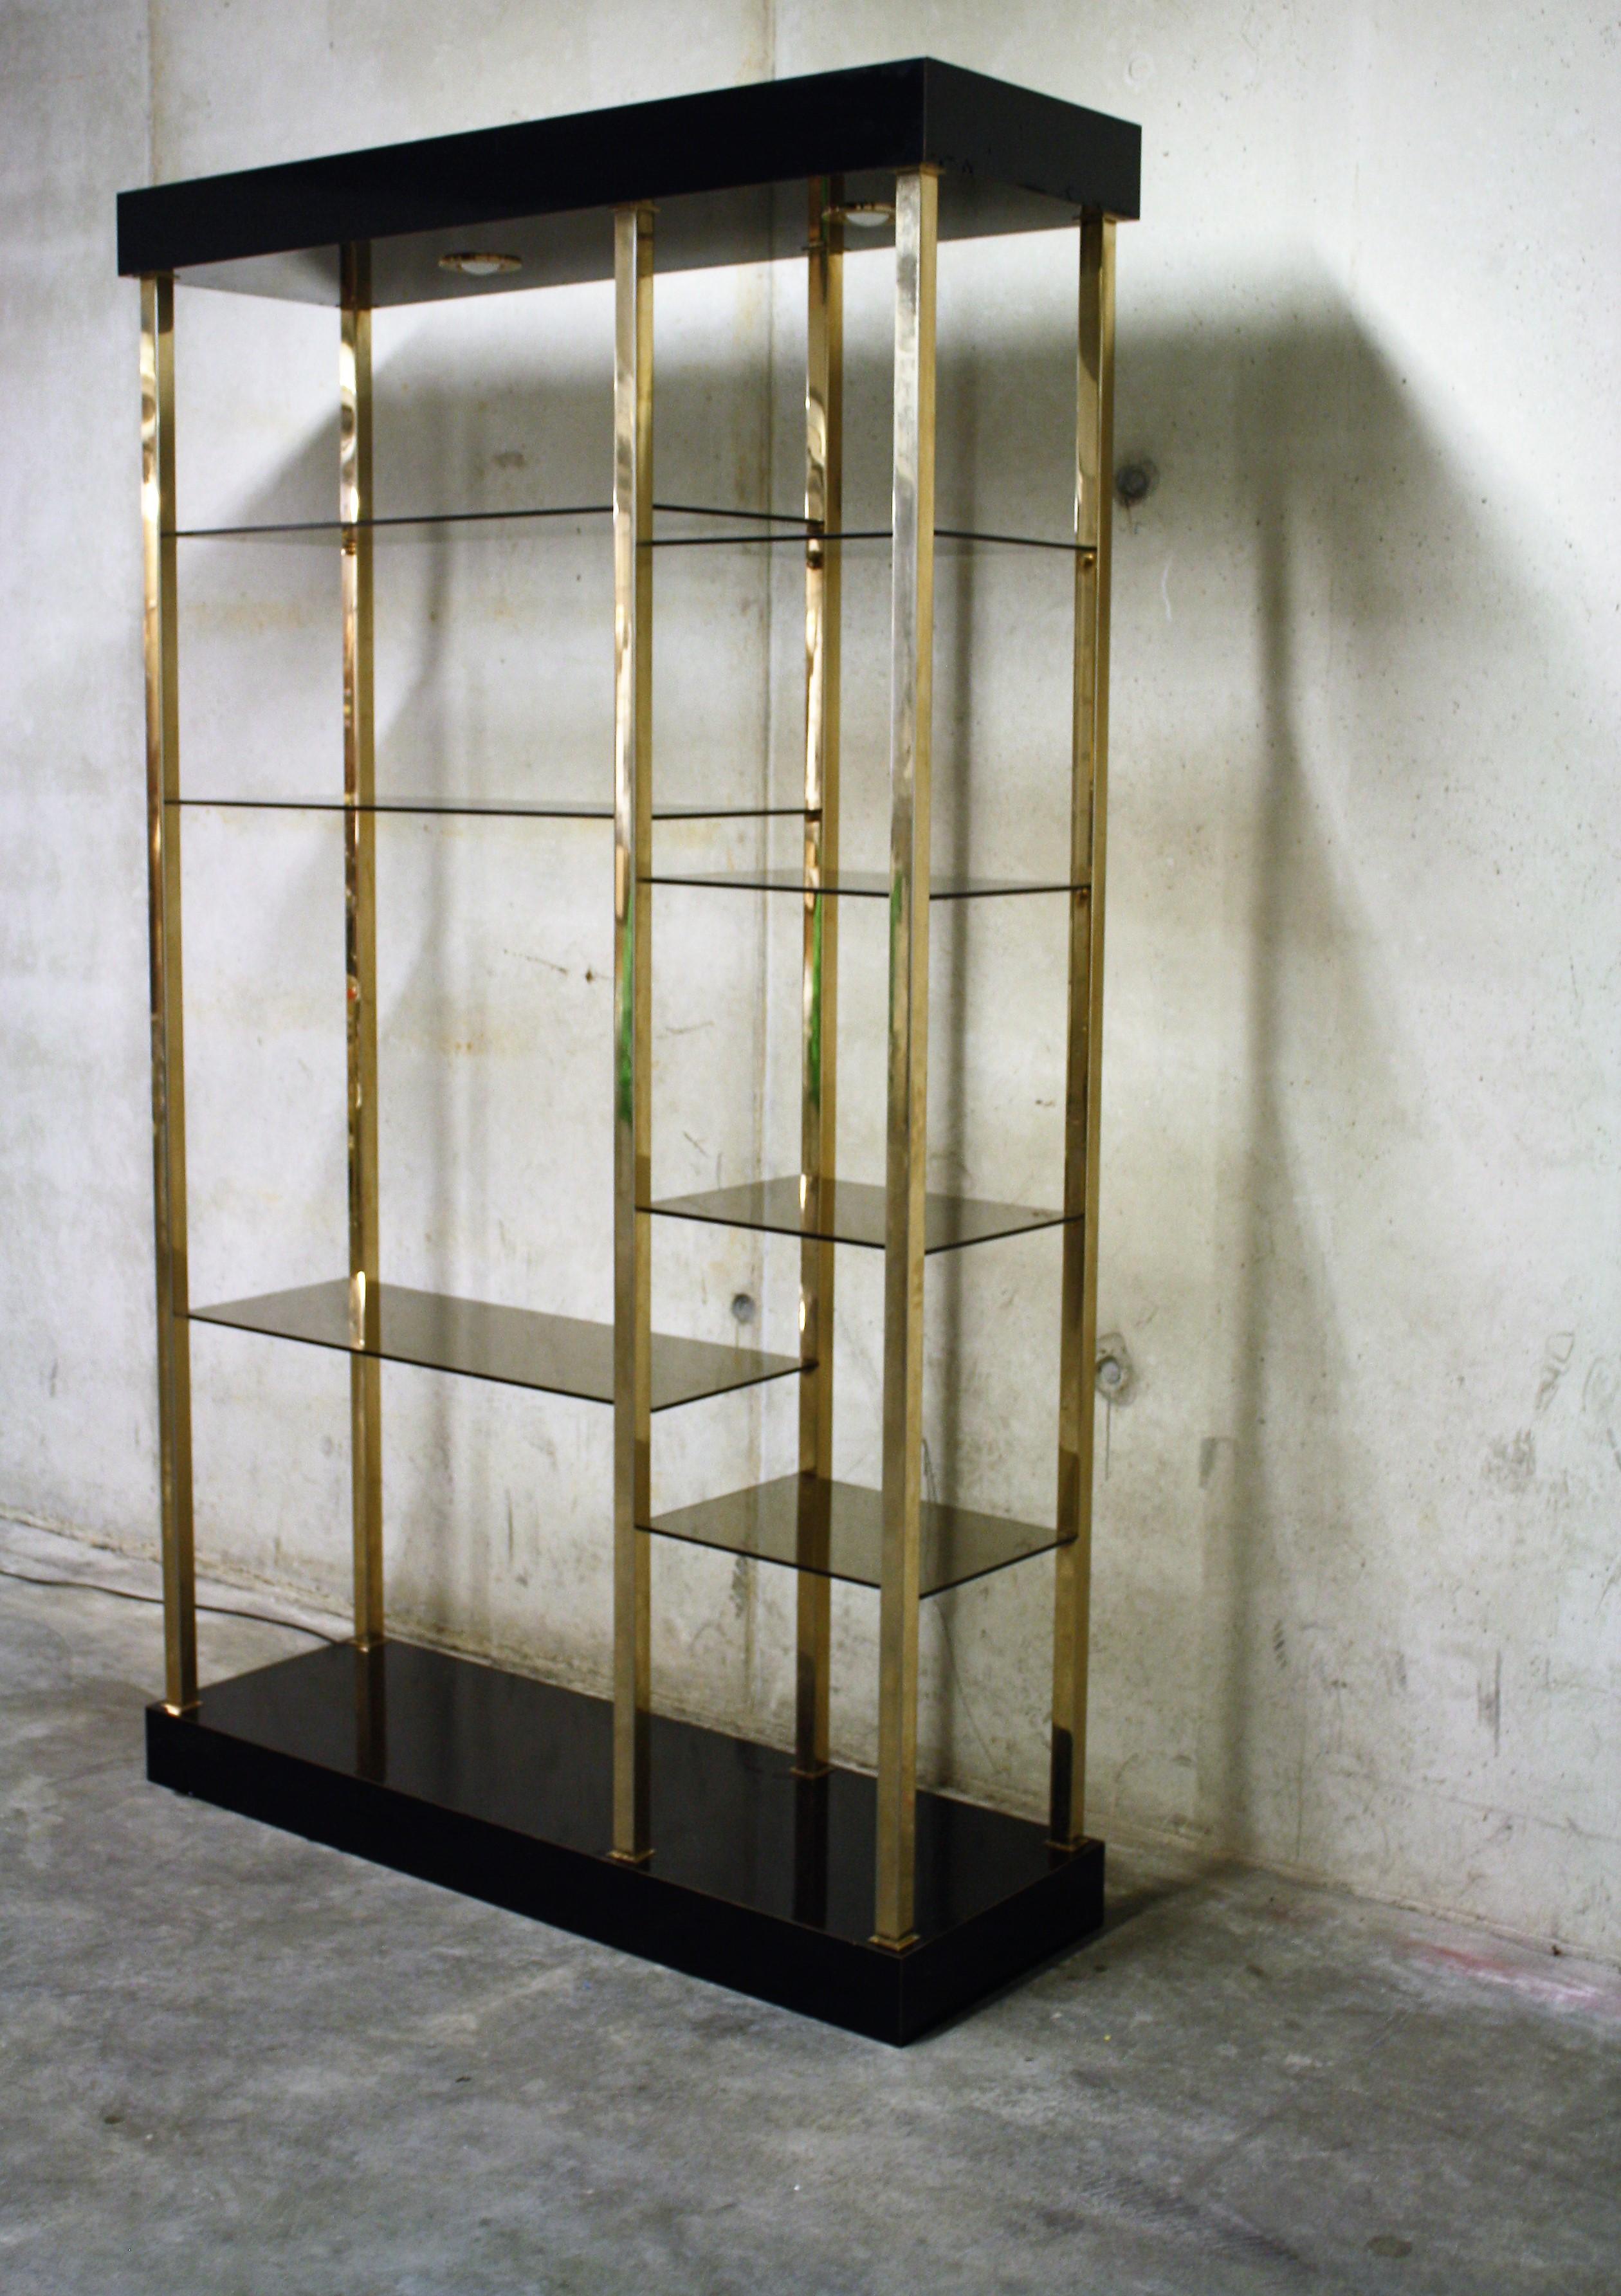 Hollywood regency style wall unit produced by Belgochrom.

This piece is made of 23-karat gold layered metal with a lacquered wooden top and bottom with two lights.

The multi level shelves are made of smoked glass.

The shelve is in good